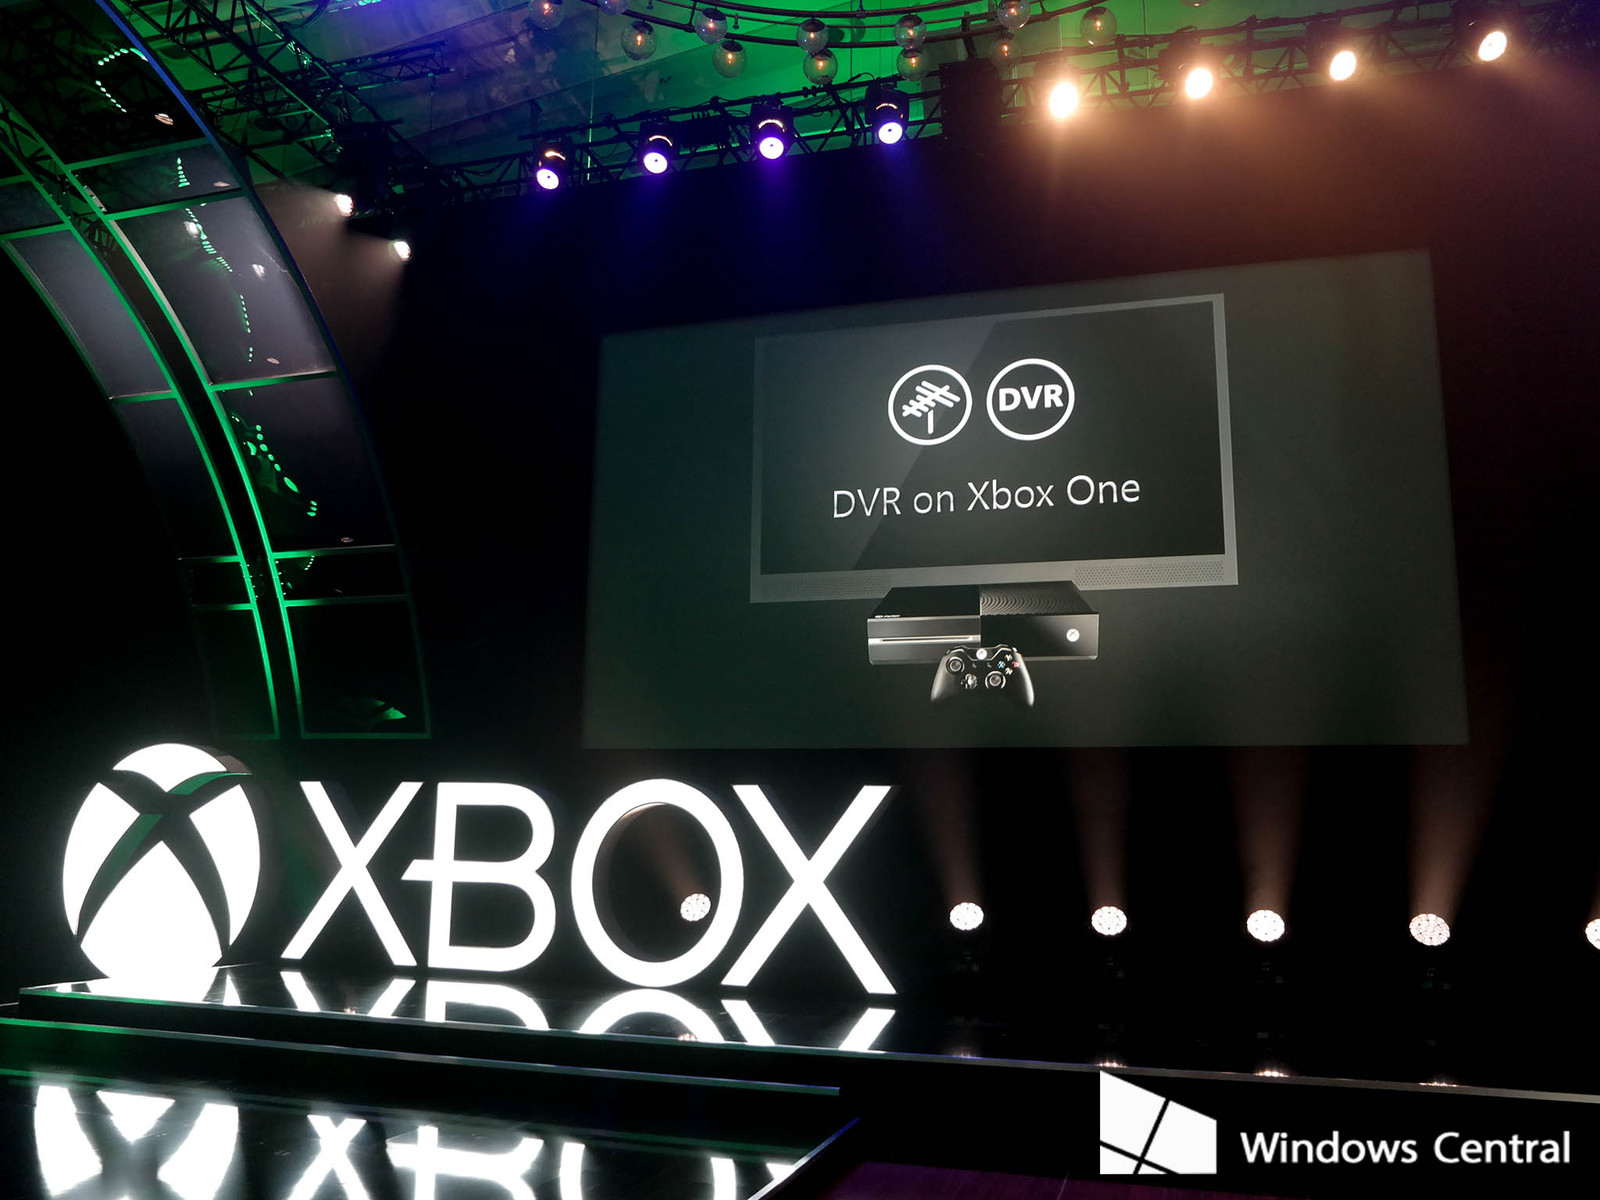 Microsoft Not Adding DVR Feature to Xbox One - Focusing on More Gaming Features